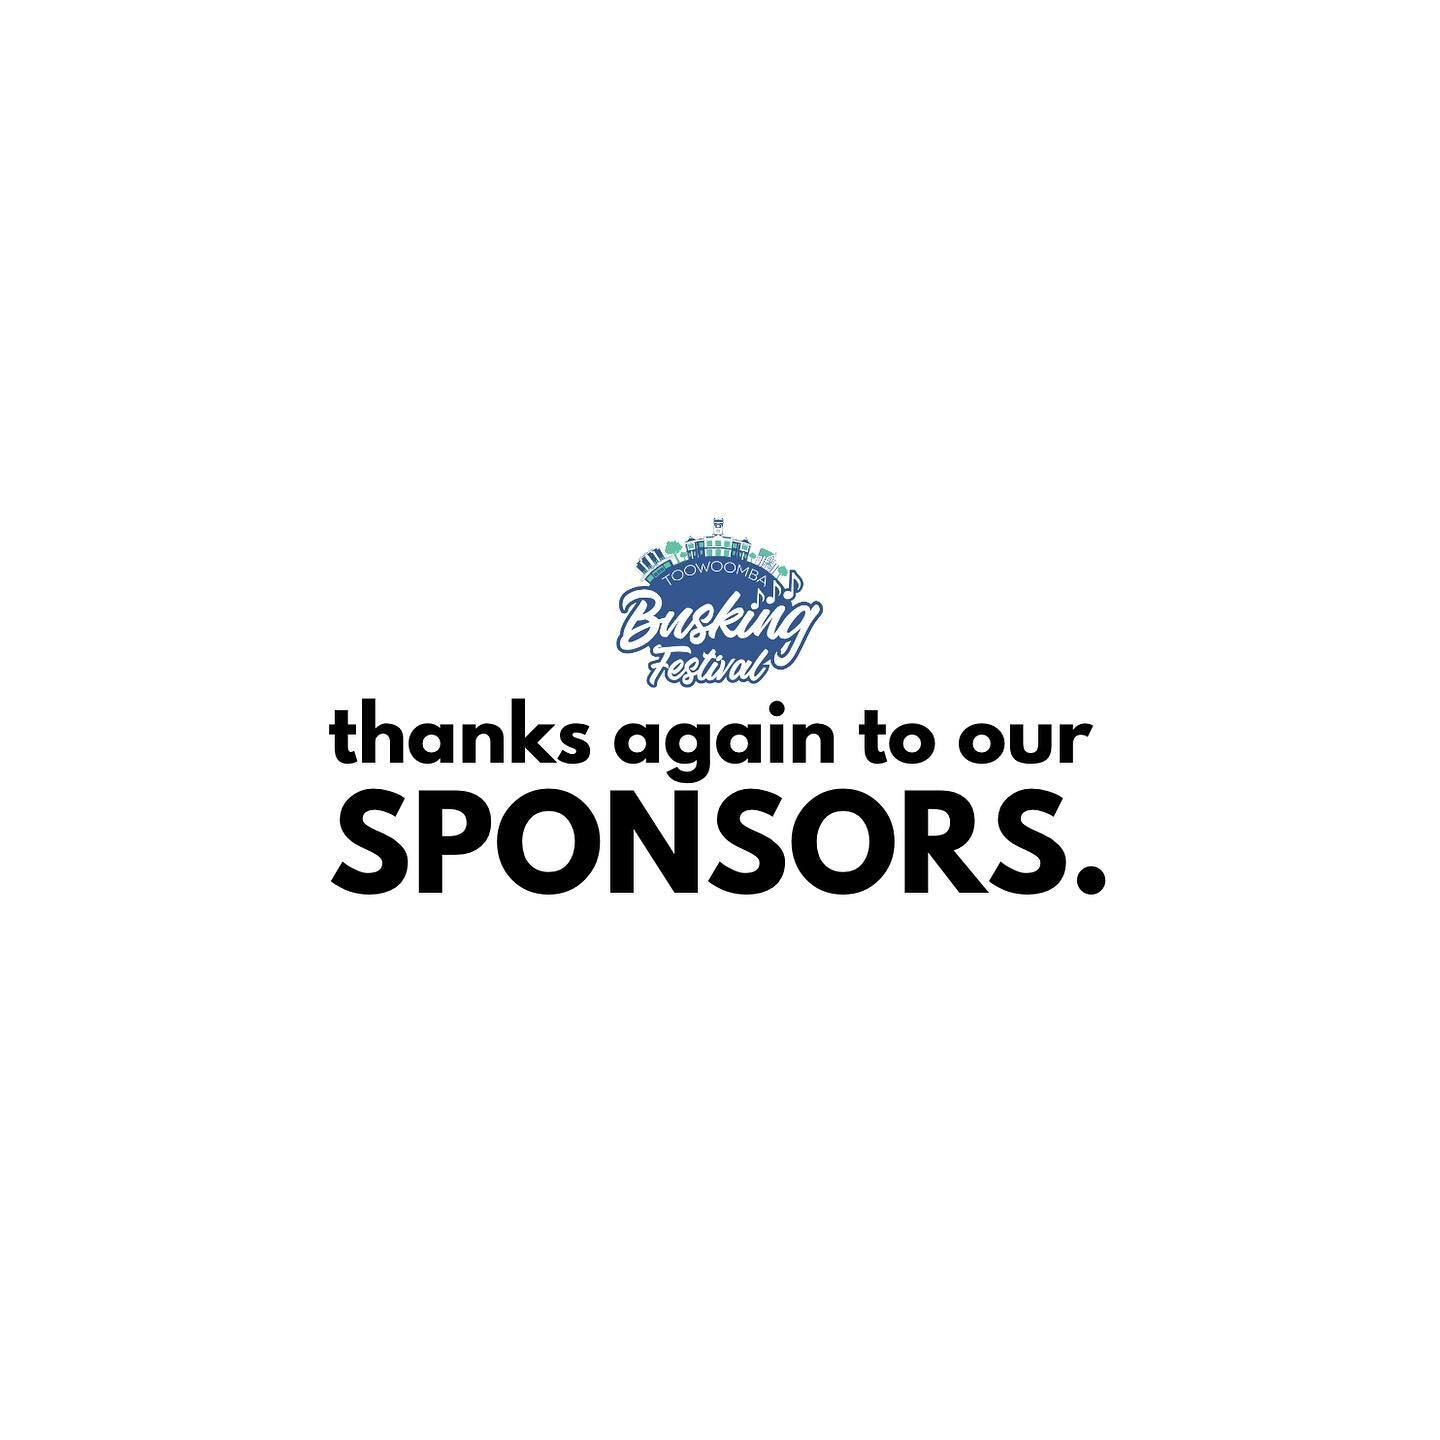 We could not run Toowoomba Busking Festival without our GENEROUS sponsors, businesses, and the SUPPORT of our community!

THANKS to our Major Sponsors:
@grandcentral 
@ywamtoowoomba 
@toowoombaregion 
@twbchamber 
@twbachronicle 

Also, thank you to 